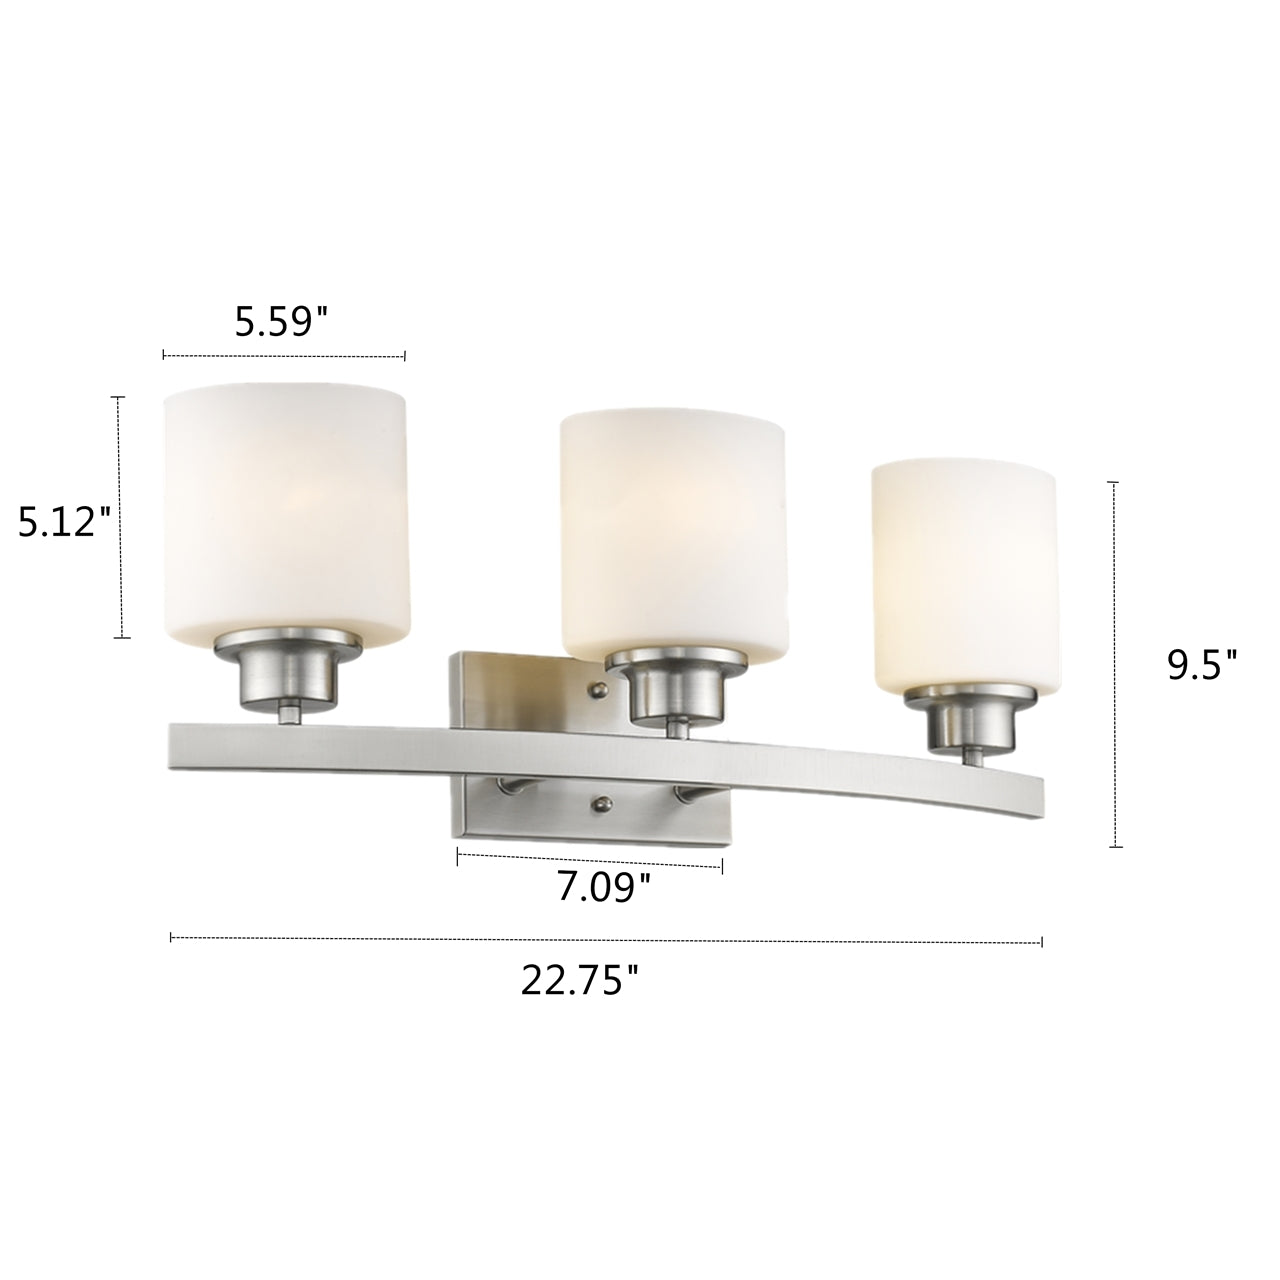 AALIYAH Contemporary 3 Light Brushed Nickel Bath Vanity Light Opal White Glass 23" Wide